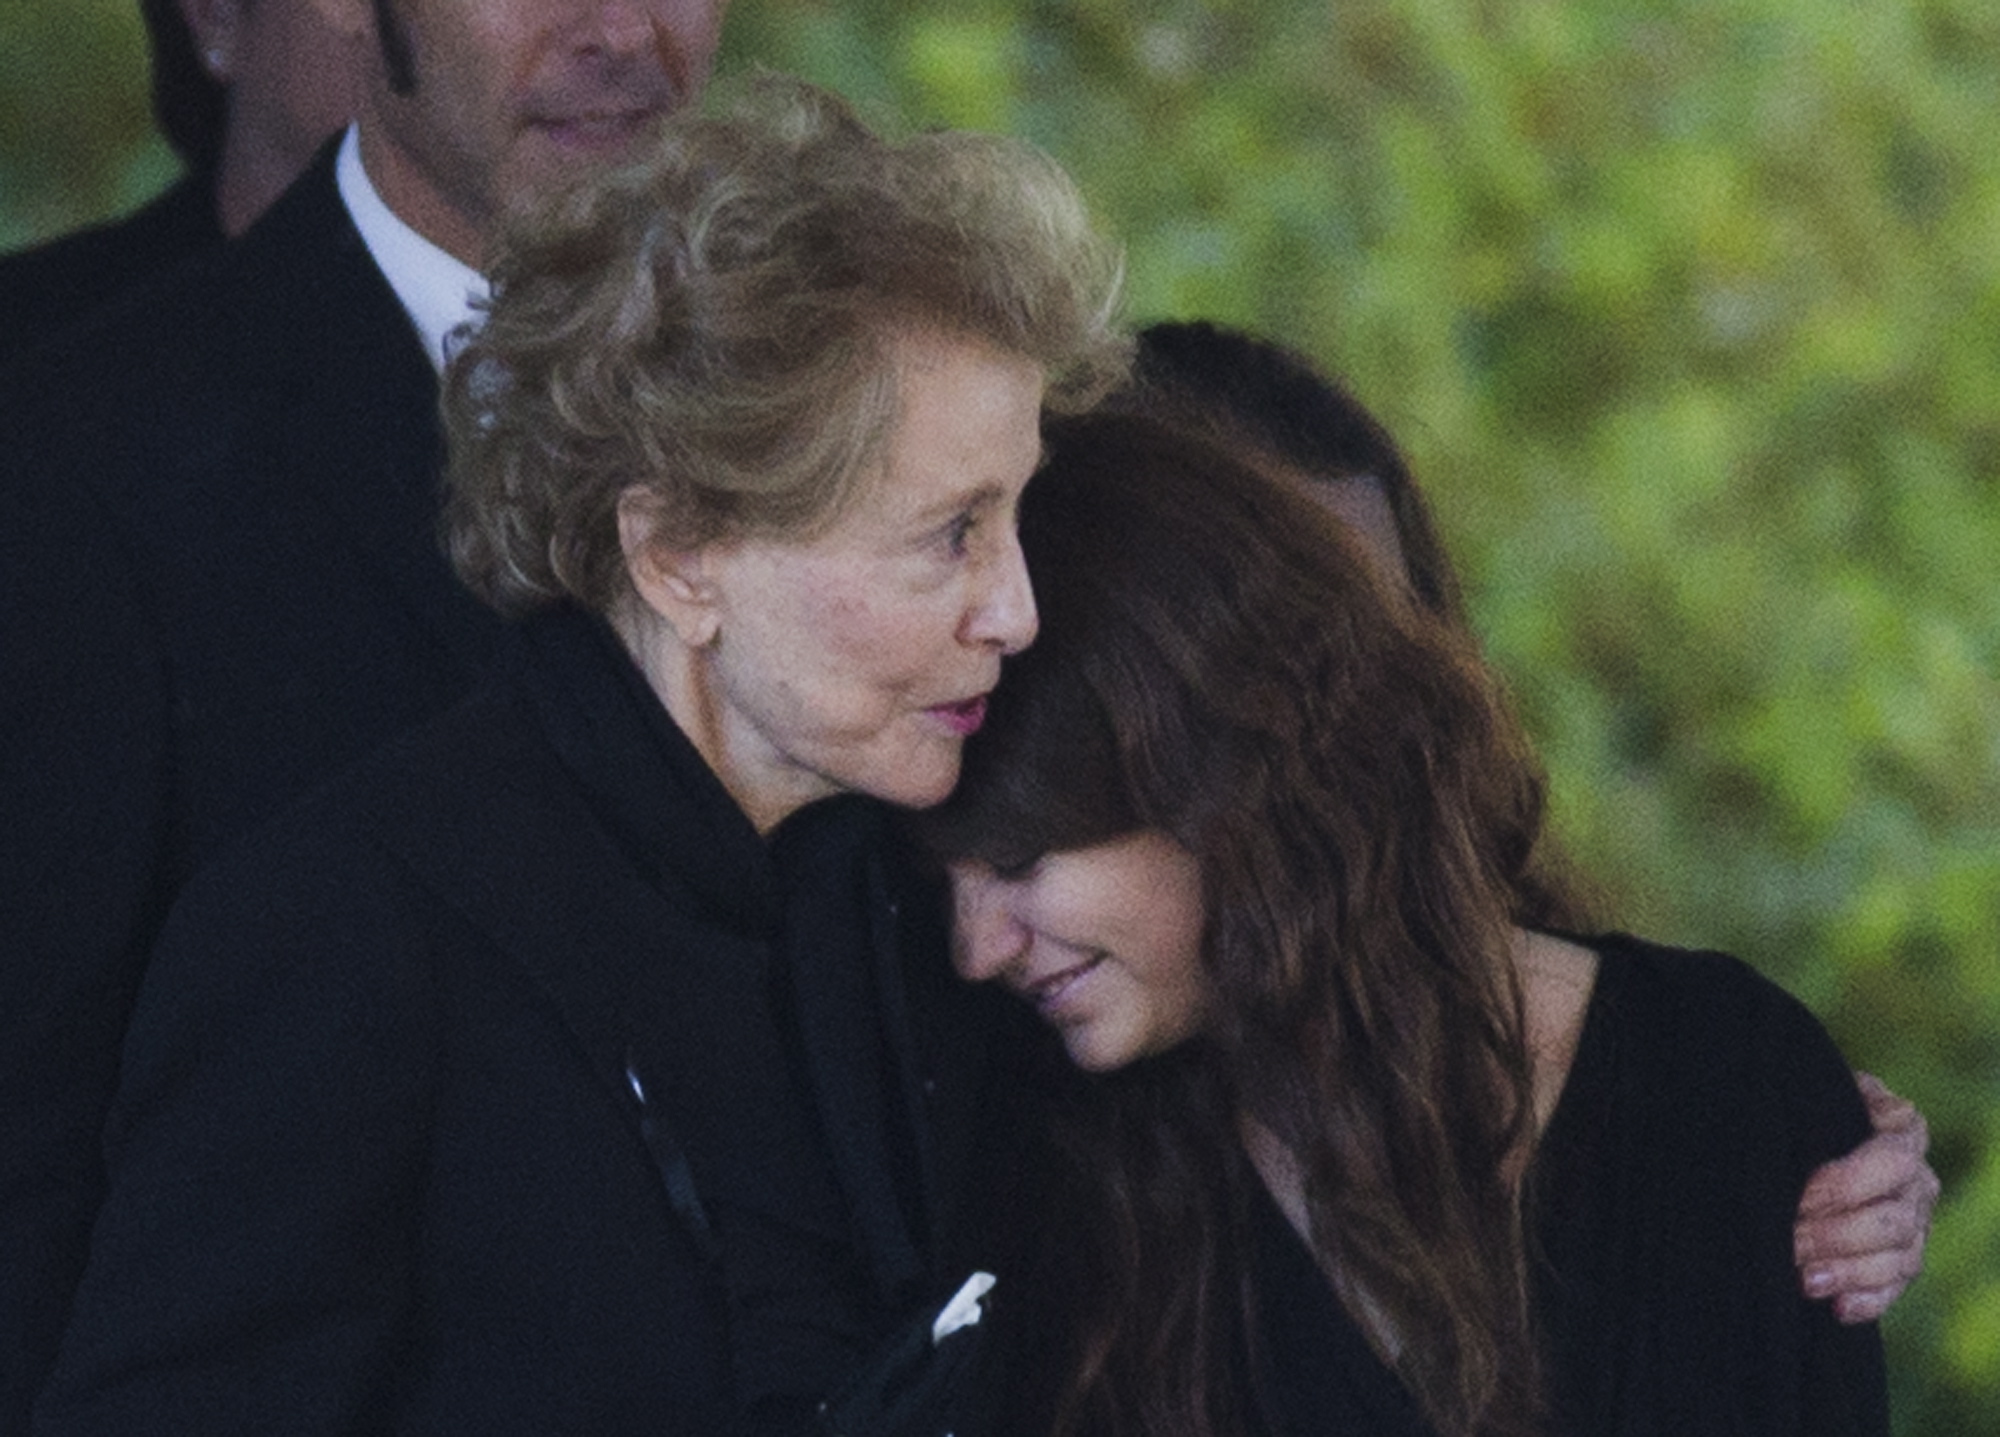 Joan Specter, left, hugs a woman as she and others leave Har Zion Temple after the funeral for her husband, former U.S. Sen. Arlen Specter, on Tuesday in Penn Valley, Pa. Family members say Specter died Sunday of complications from non-Hodgkin lymphoma.